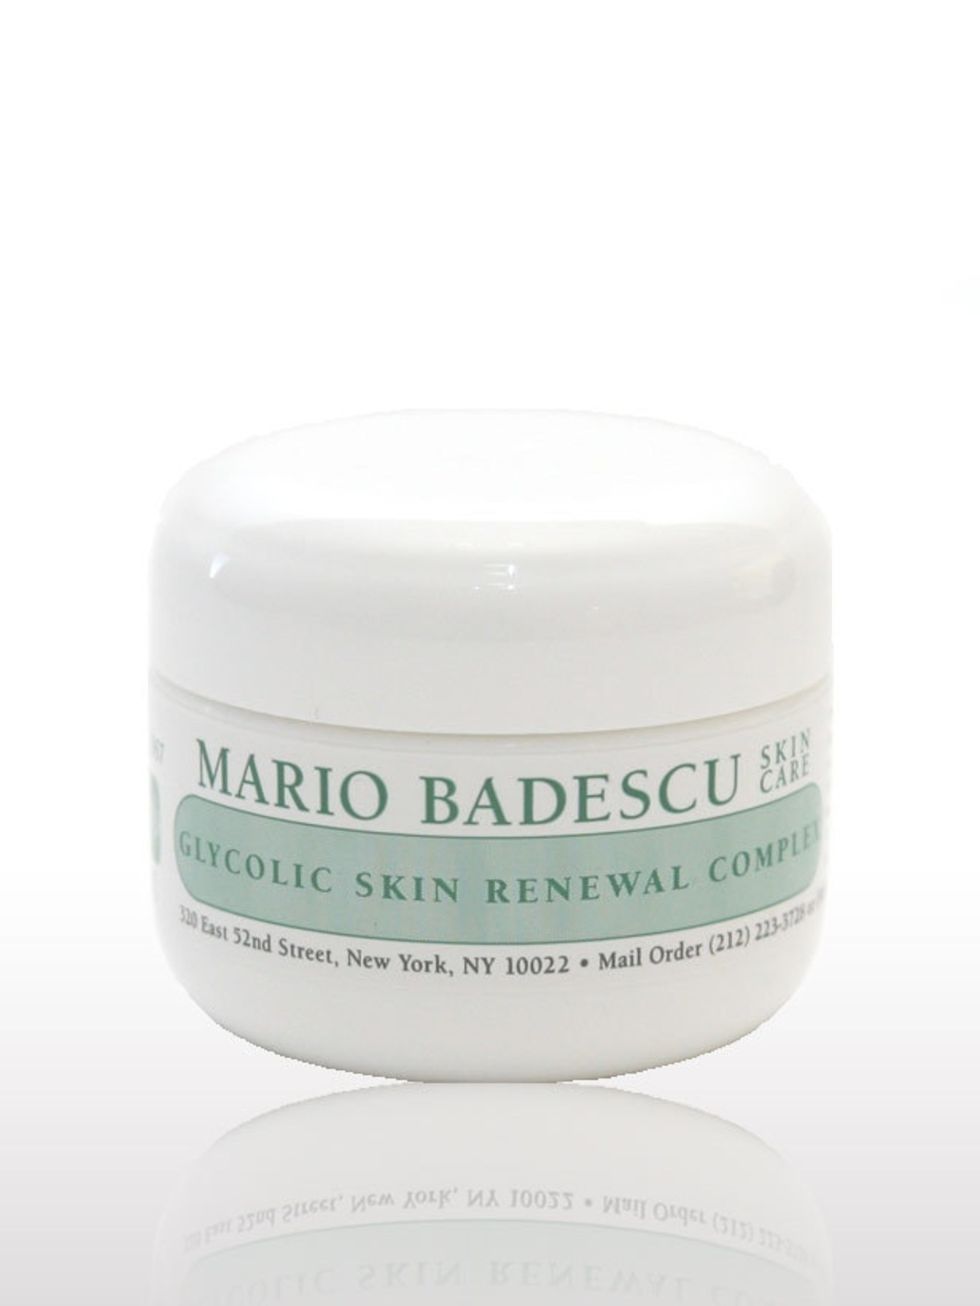 <p>Glycolic Skin Renewal Complex, £28.50, by Mario Badescu at <a href="http://www.beautybay.com/skincare/mariobadescu/glycolicskinrenewalcomplex/">www.beautybay.com</a></p><p> </p><p>A perennial fave among the Hollywood elite, this cream gently exfoliates